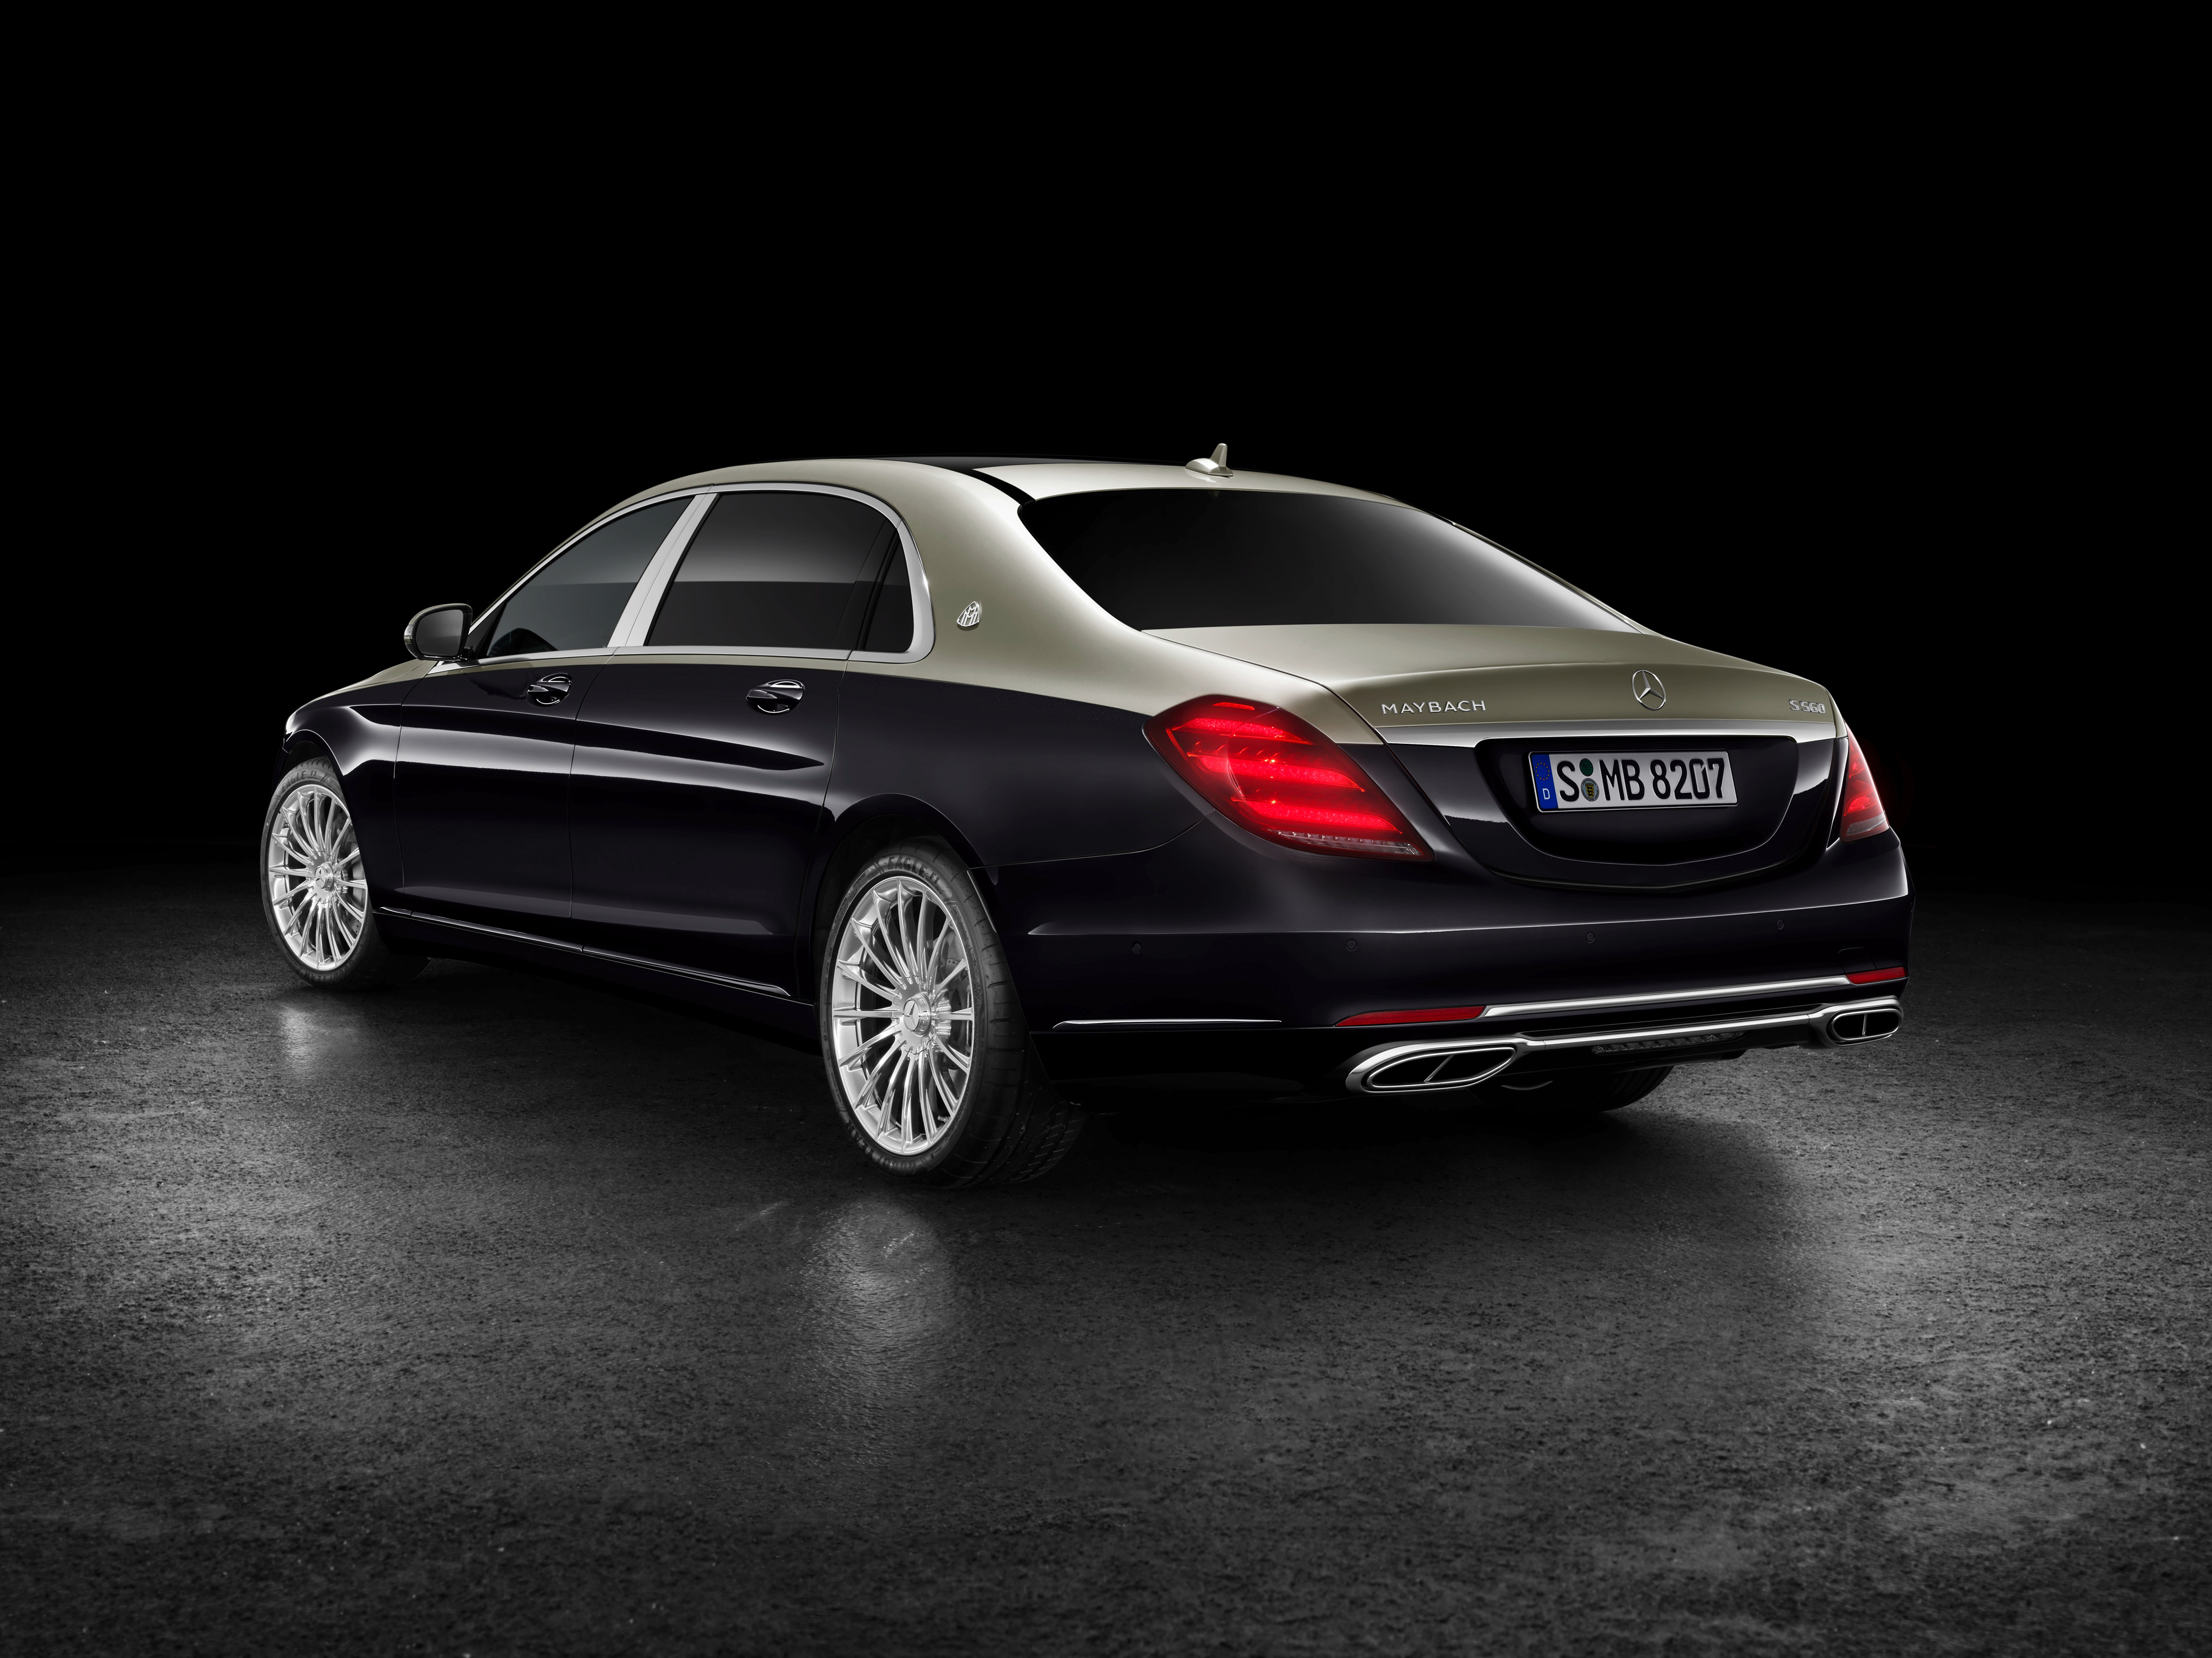 Mercedes Benz Maybach S 560 2018 Rear, HD Cars, 4k Wallpapers, Images ...